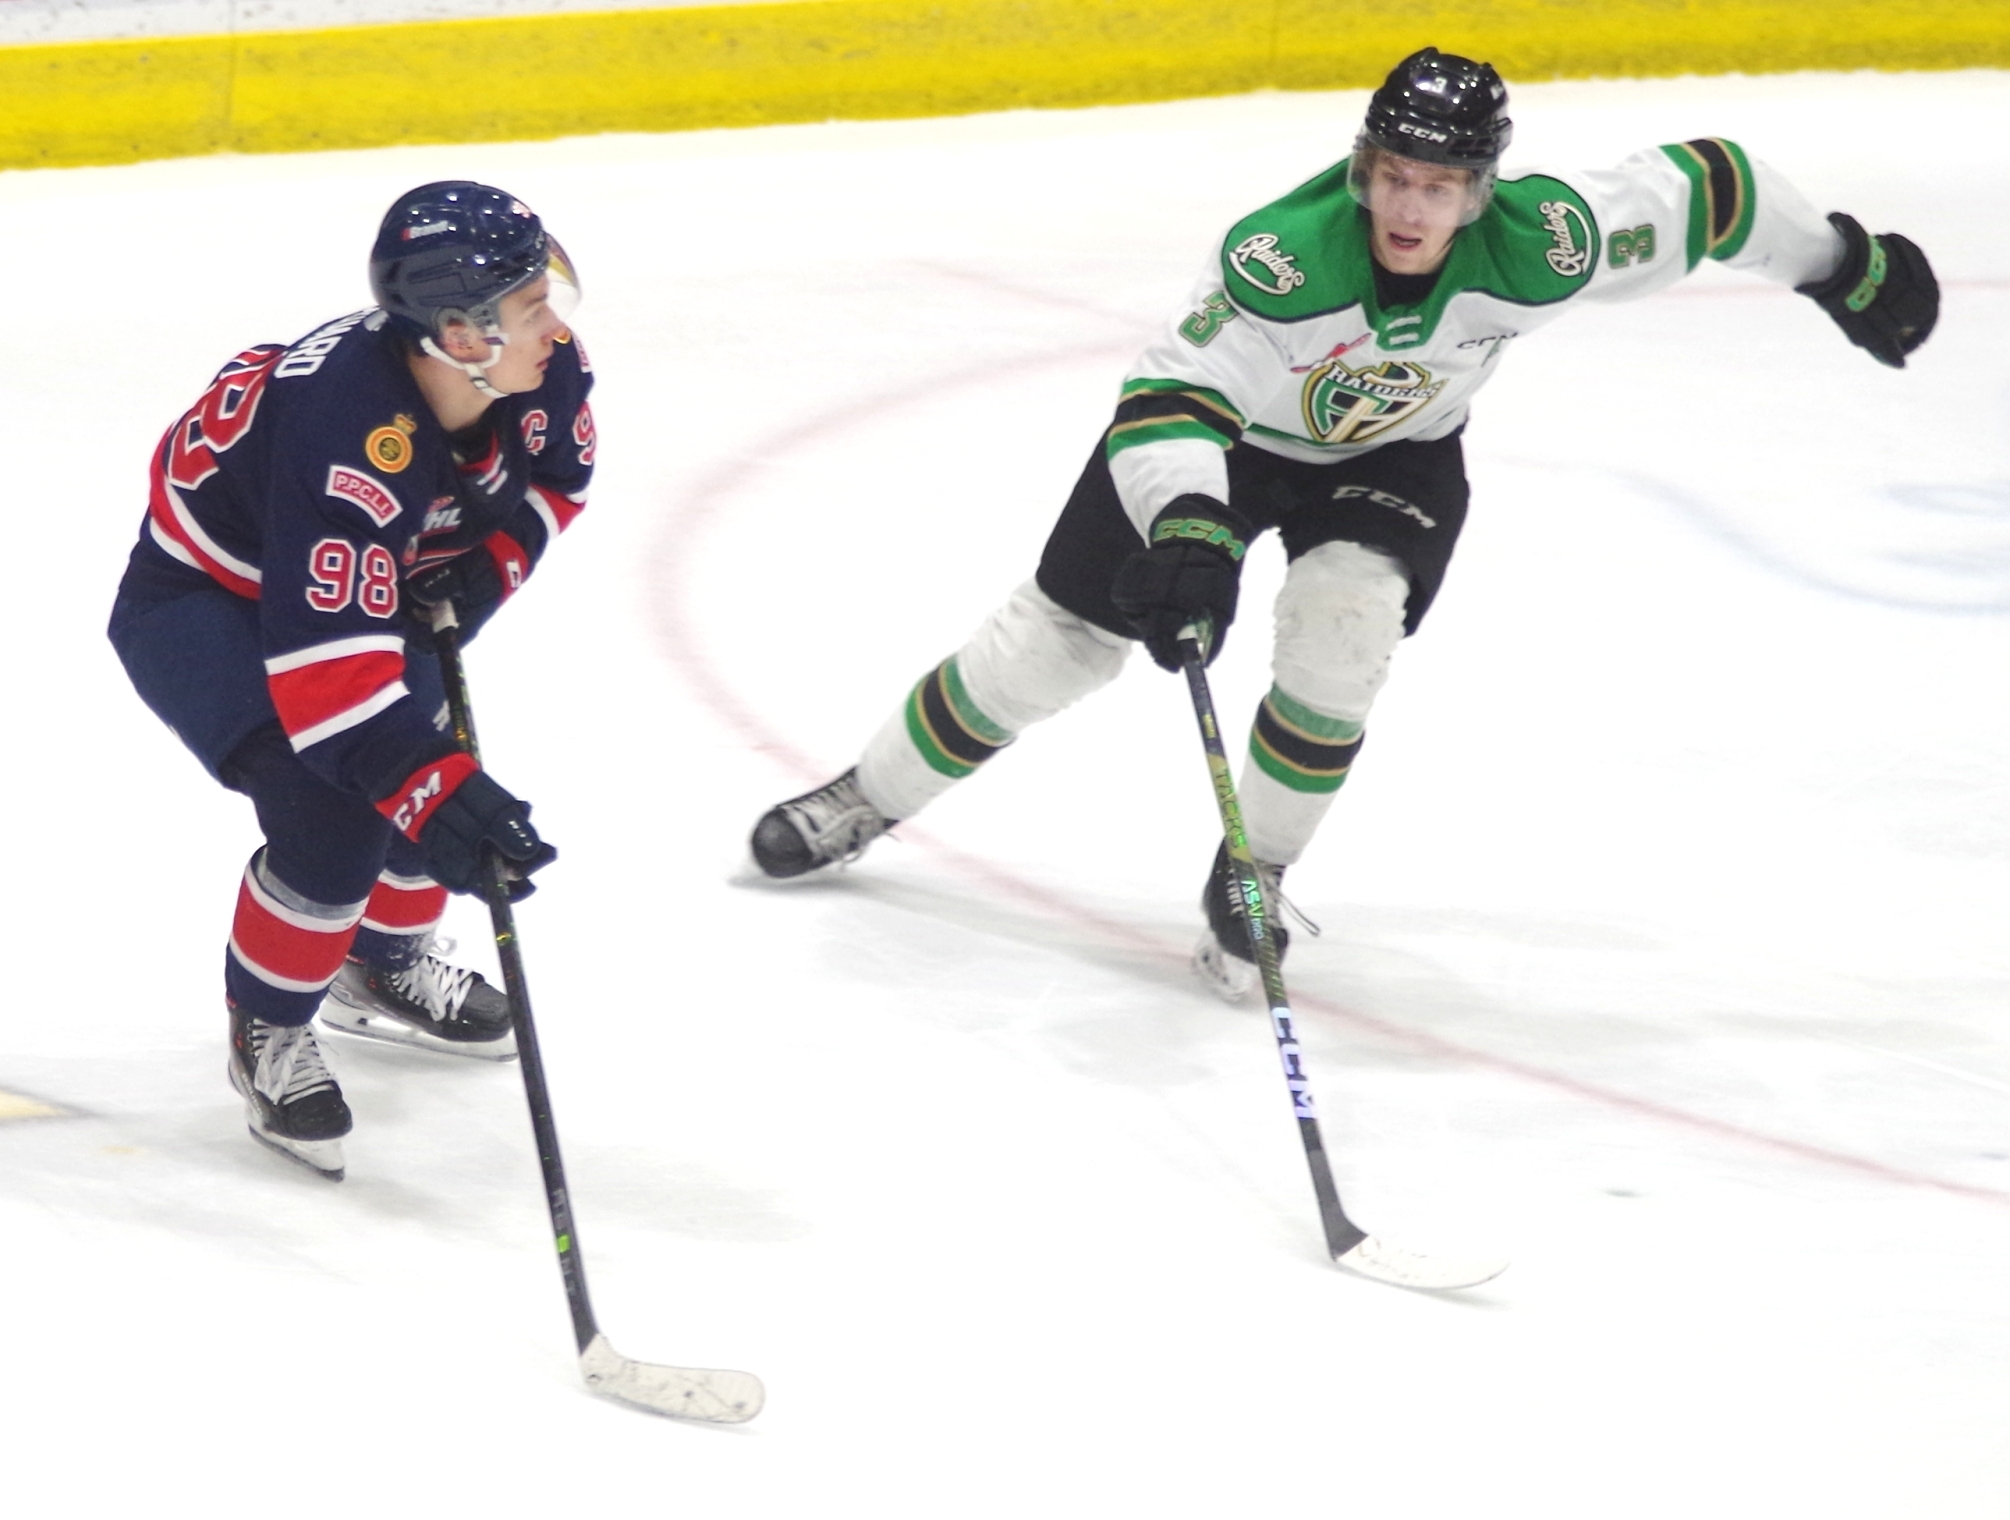 Connor Bedard's WHL career ends as Pats lose Game 7 to Blades